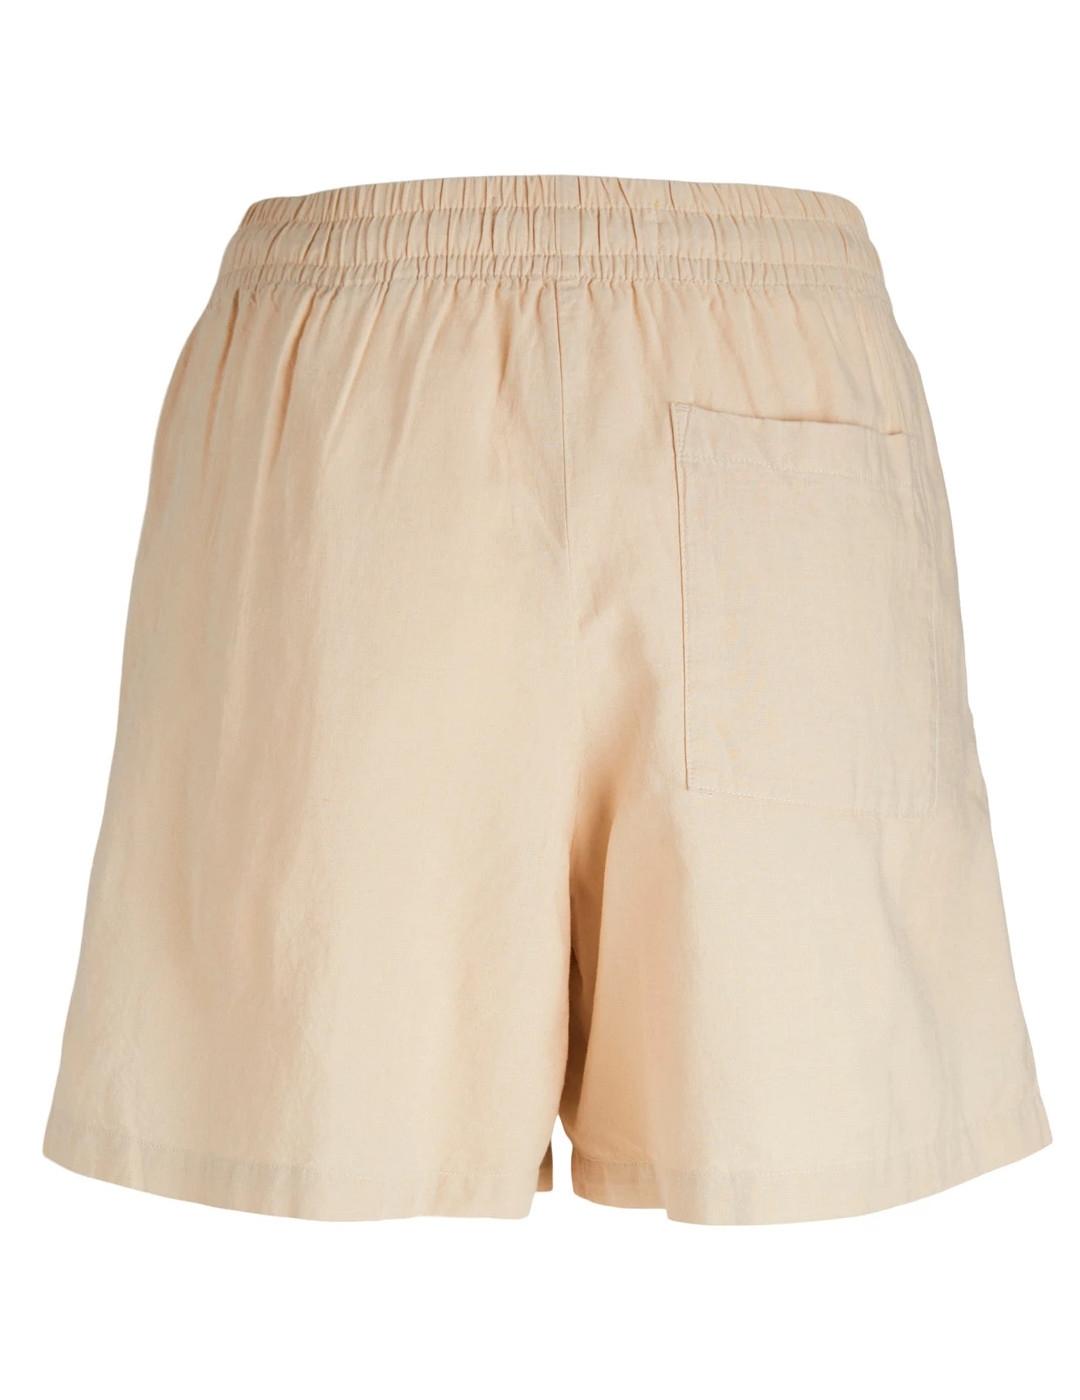 Short JJXX Amy beige lino relaxed para mujer